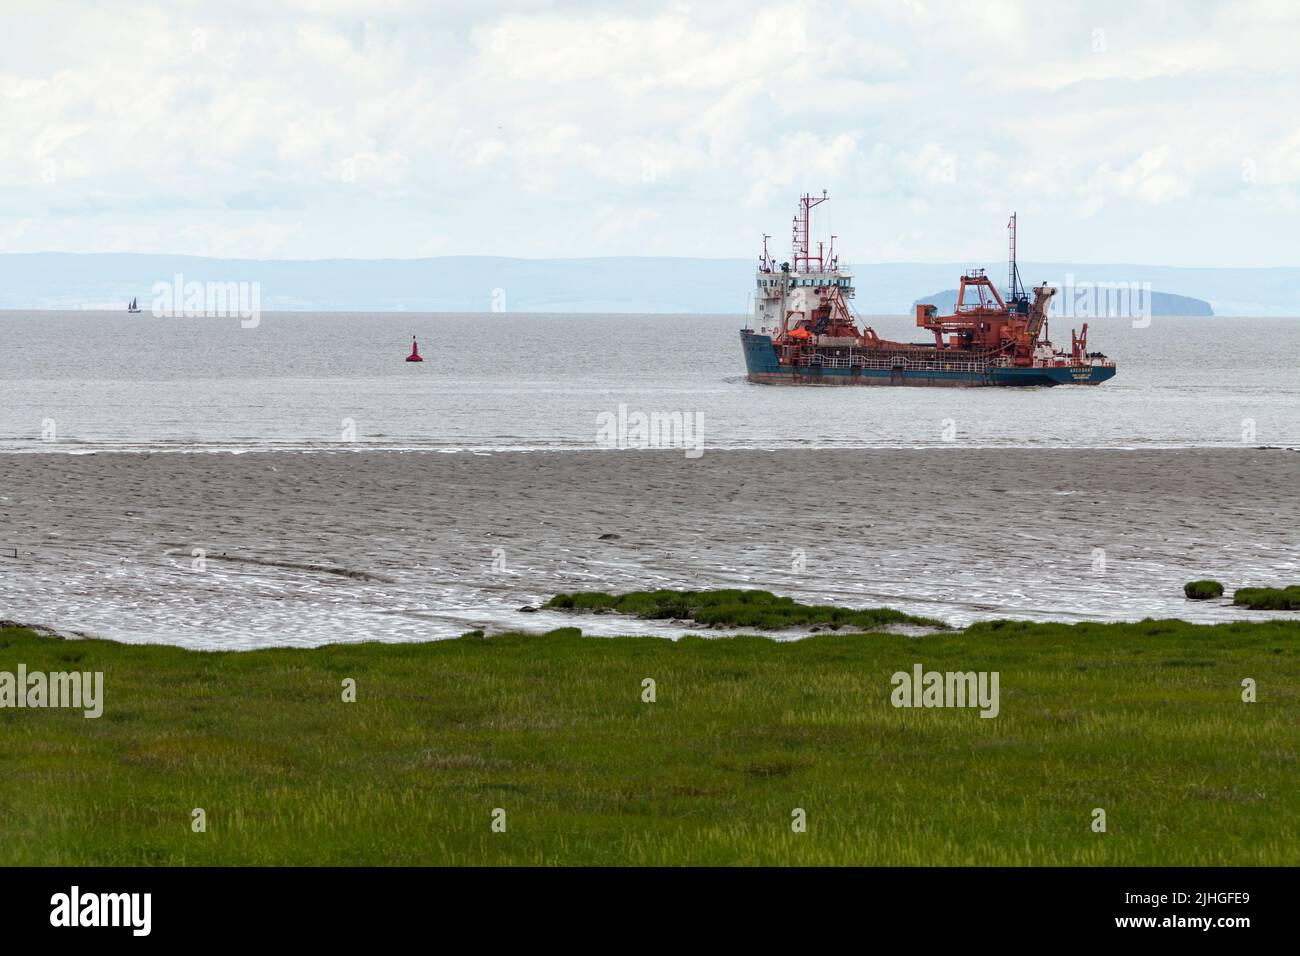 Arco dart suction (hopper) dredger ship off the coast of severn estuary newport south wales at 67.7 m long 13 m wide the vessel was made in 1990 Stock Photo